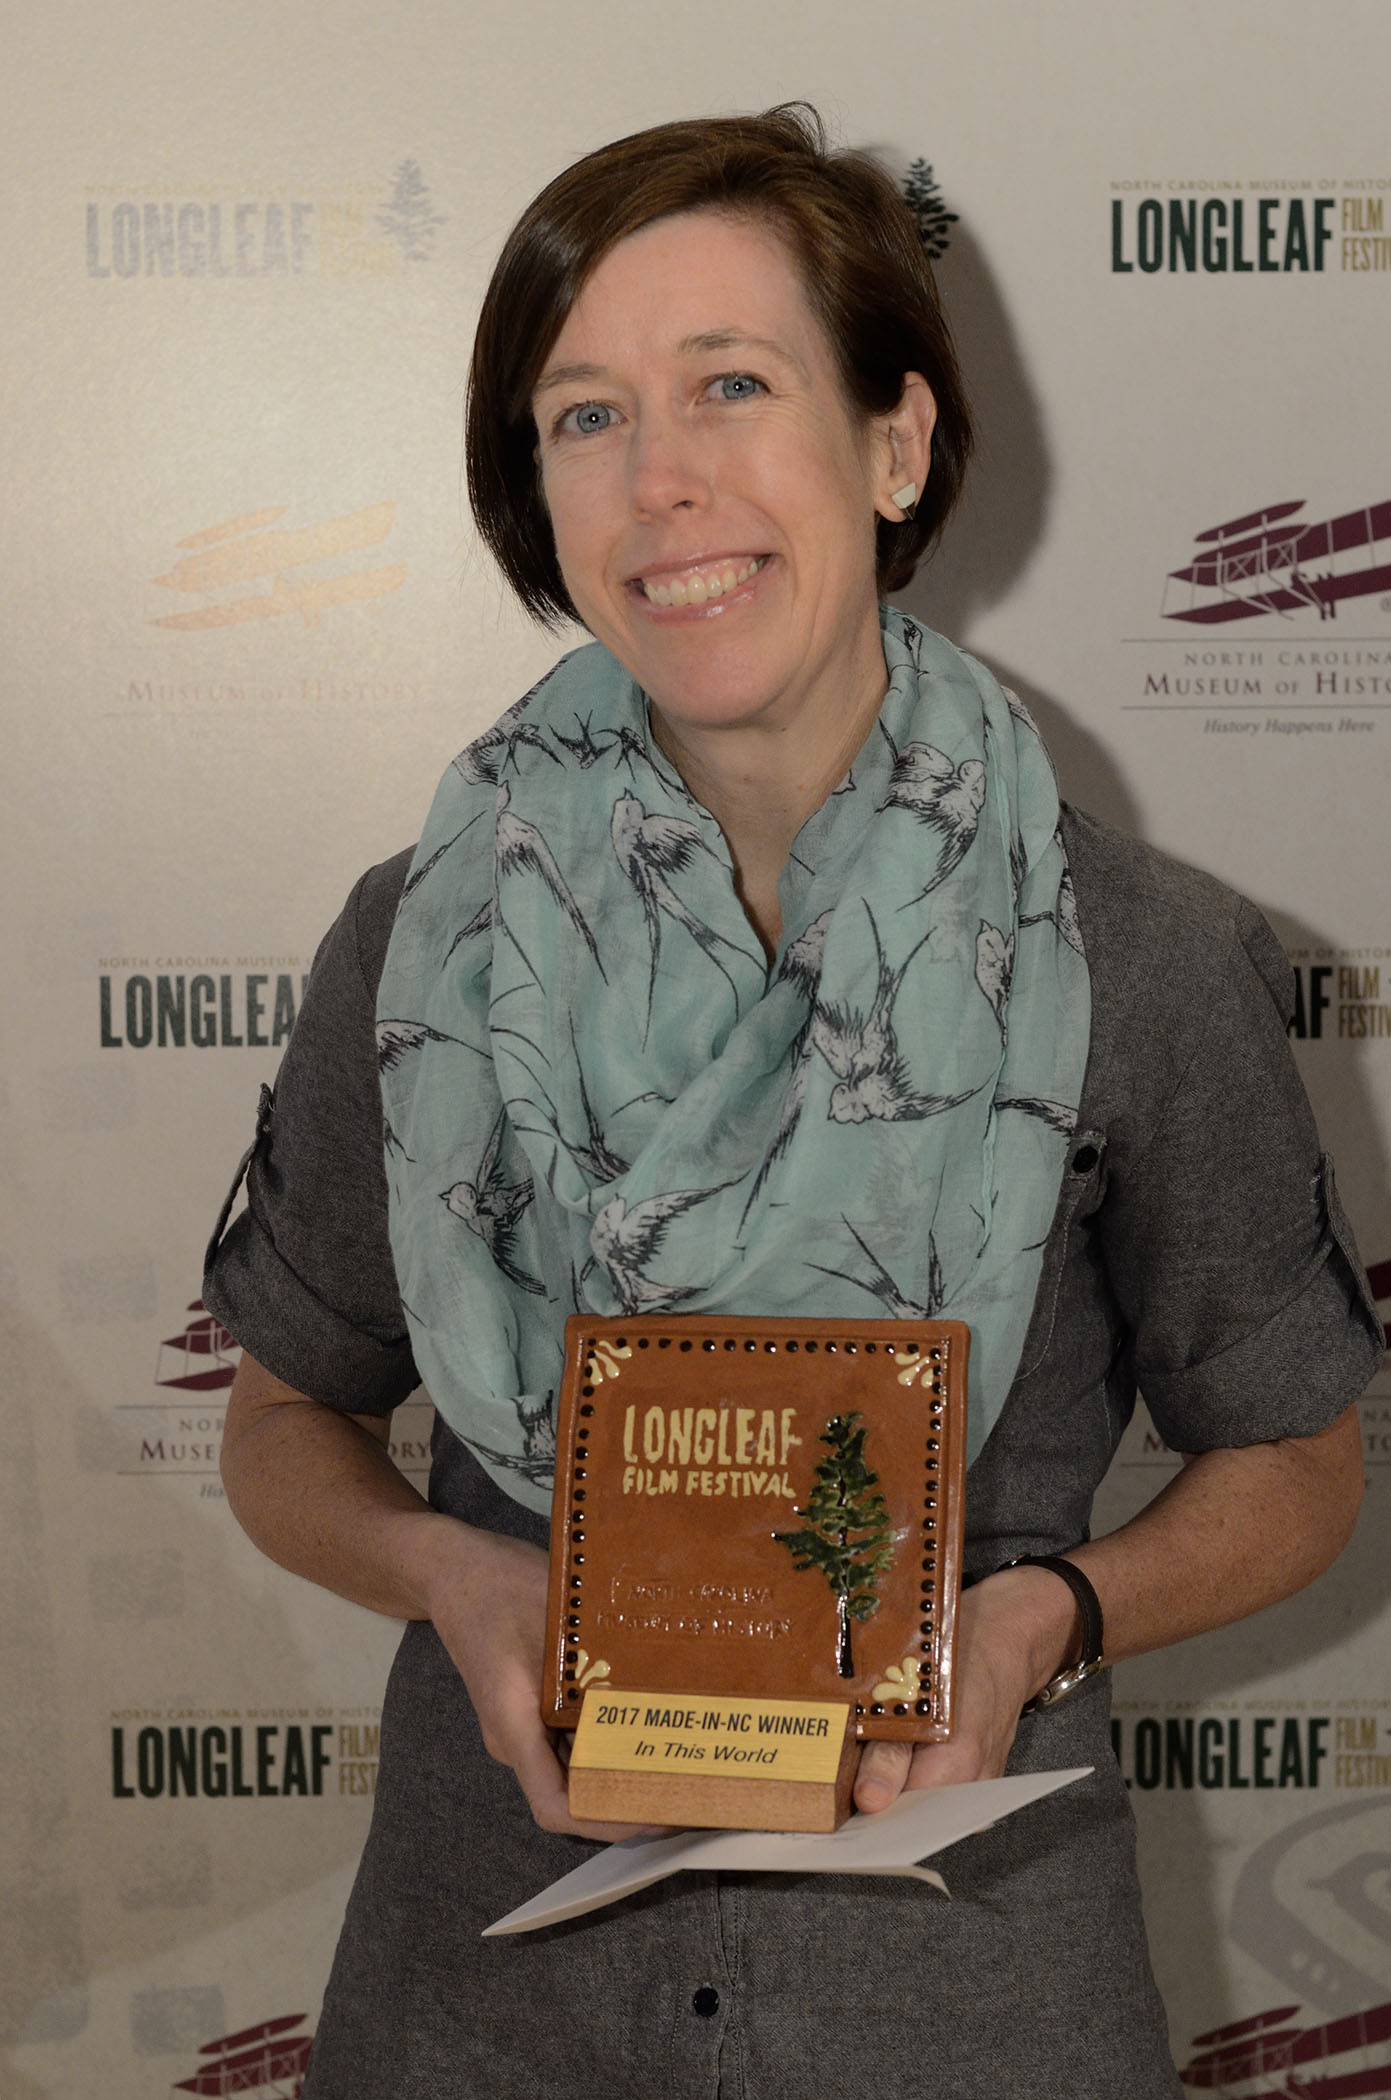 2017 Longleaf Film Festival: Made-in-NC Winner Kelly Creedon, In This World